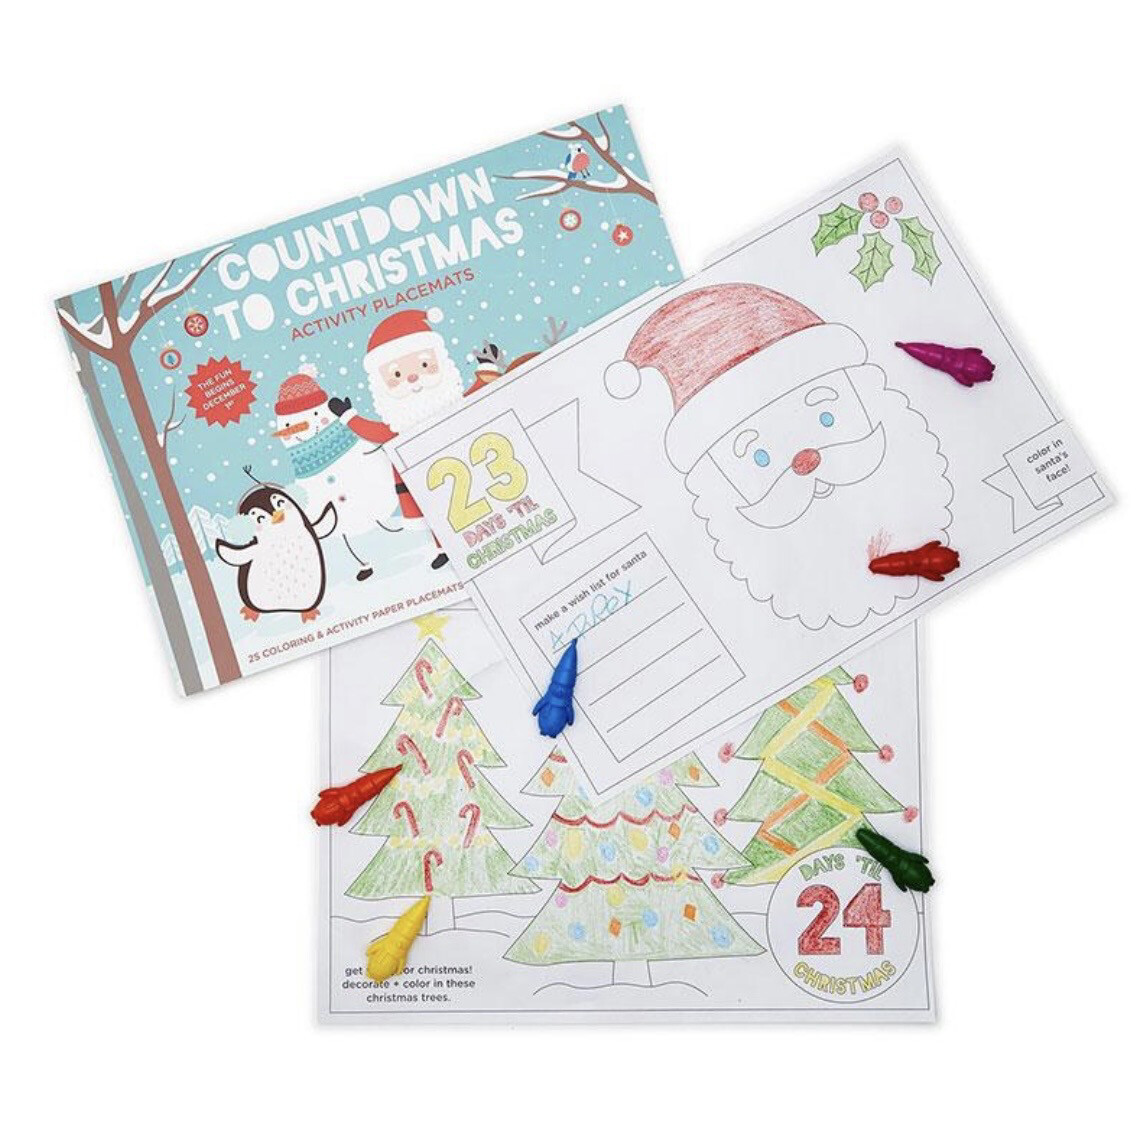 Countdown To Christmas Activity Placemats